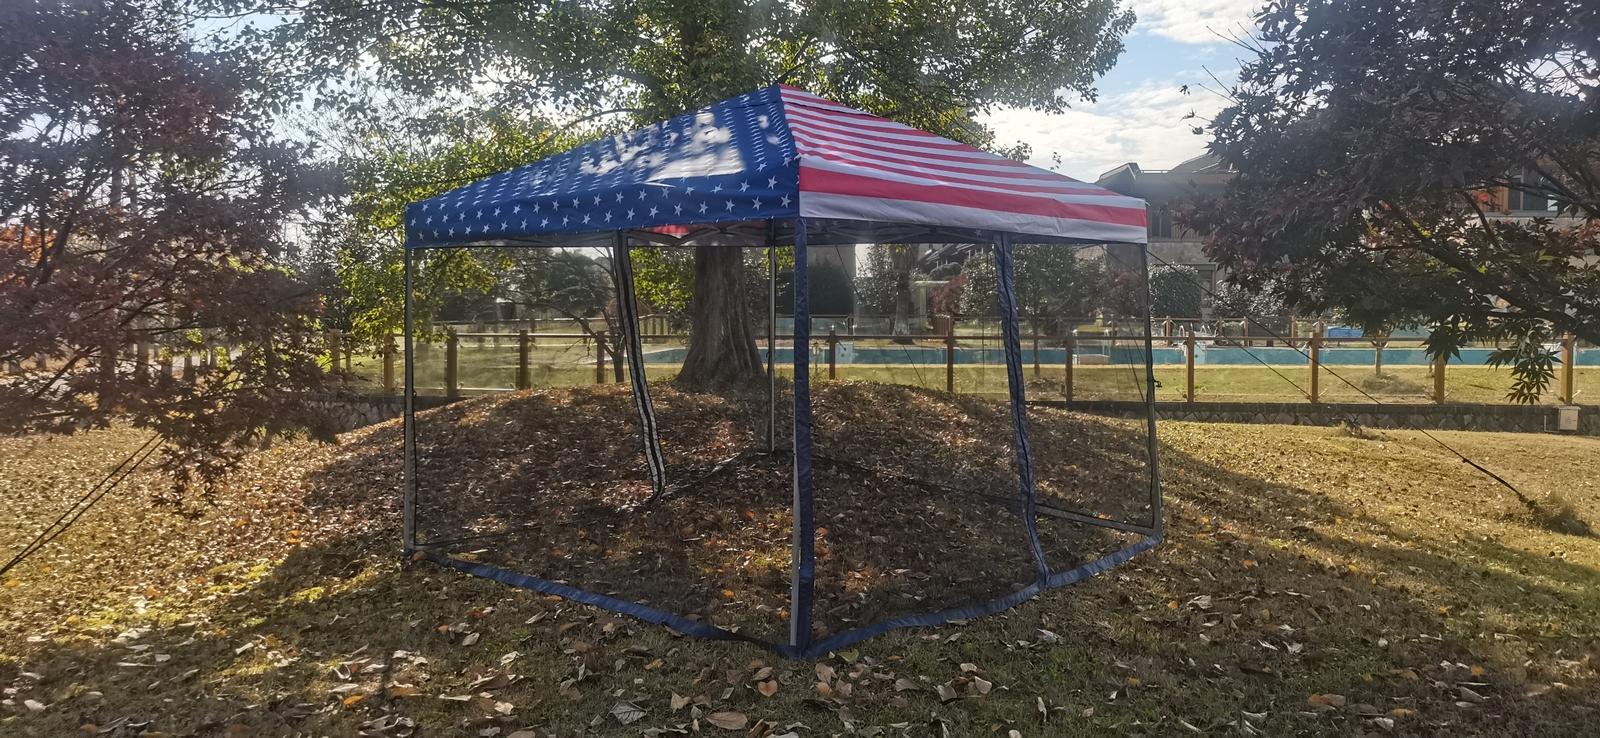 Backyard Expressions 10'x10' American Flag Pop Up Canopy